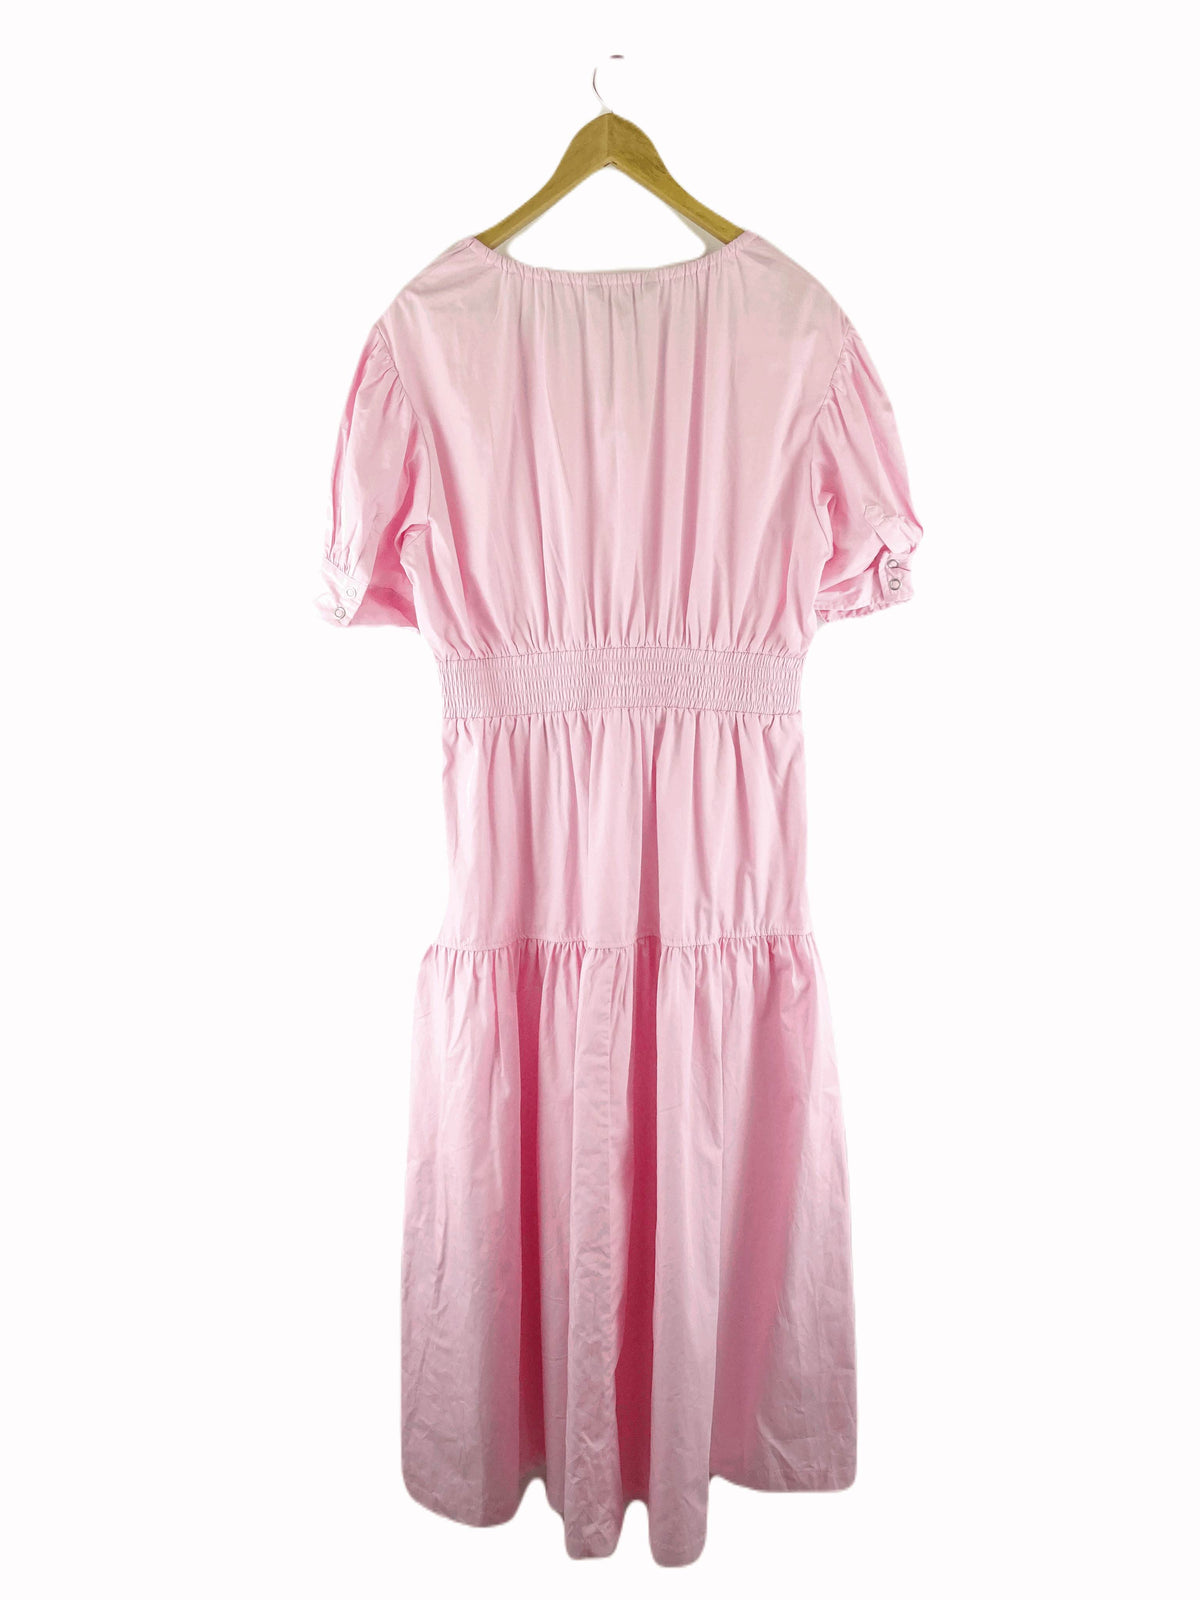 French Connections Pink Dress 14